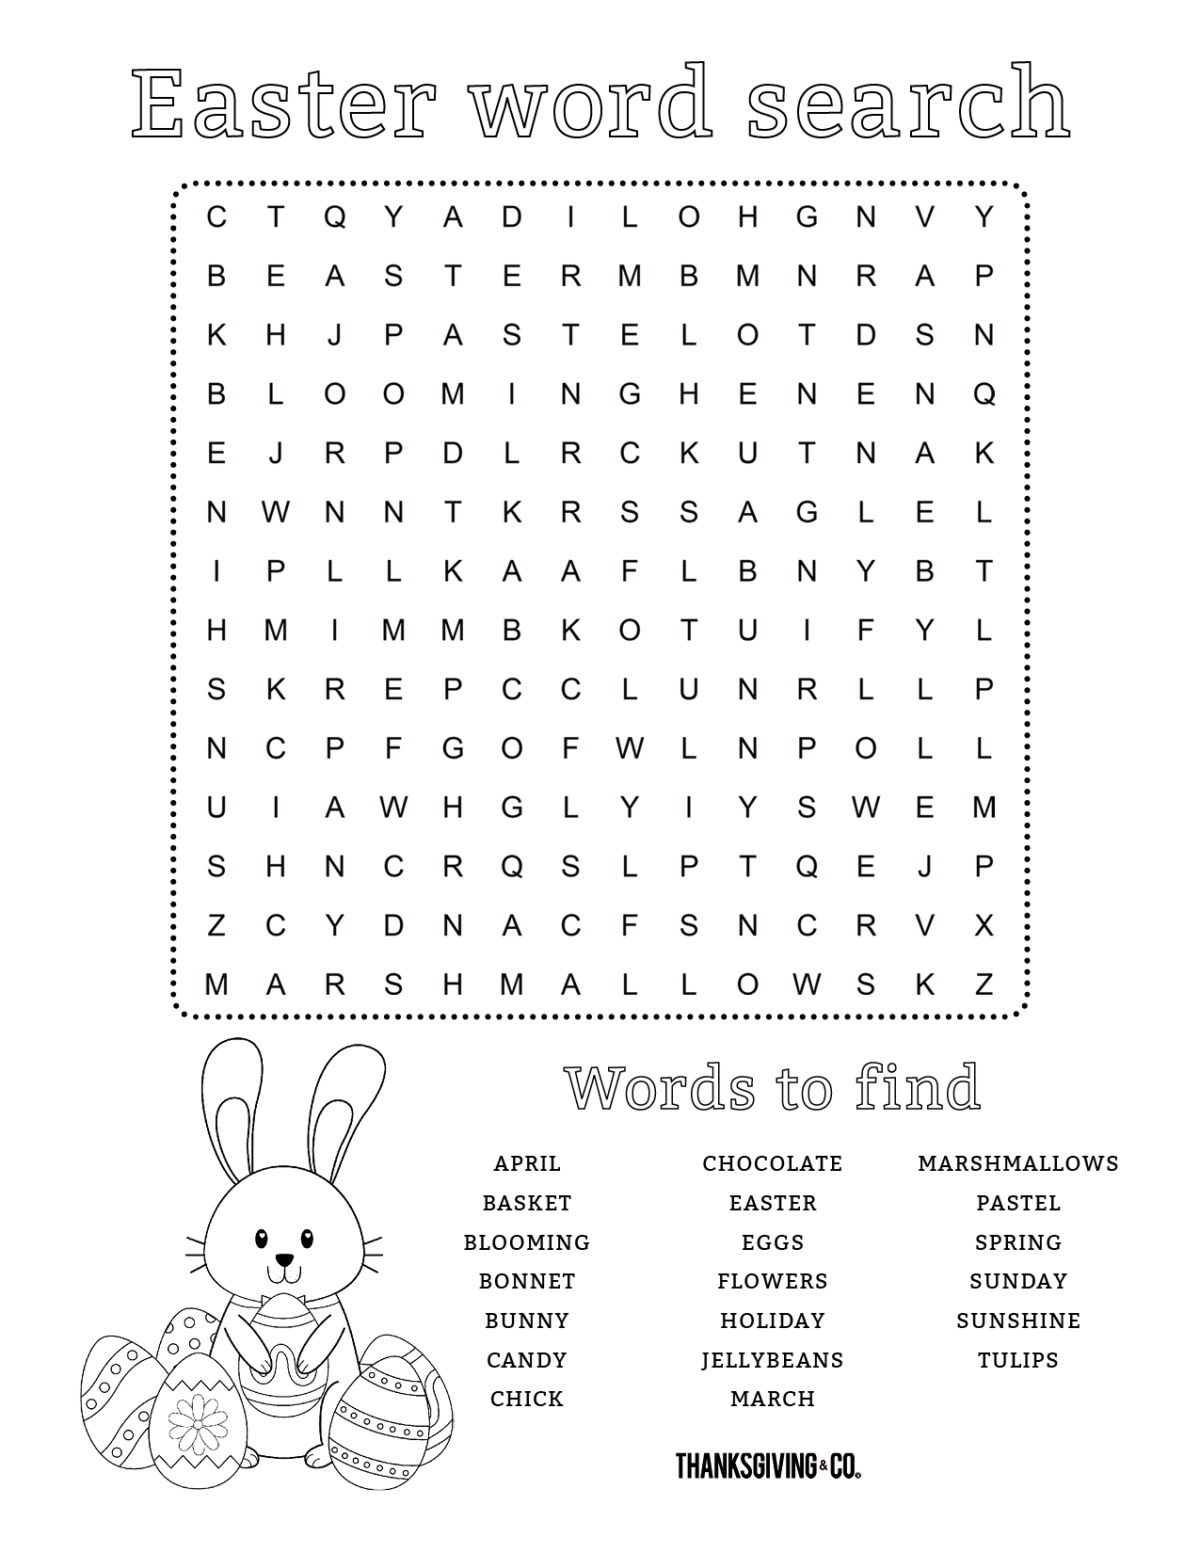 Word search - Easter